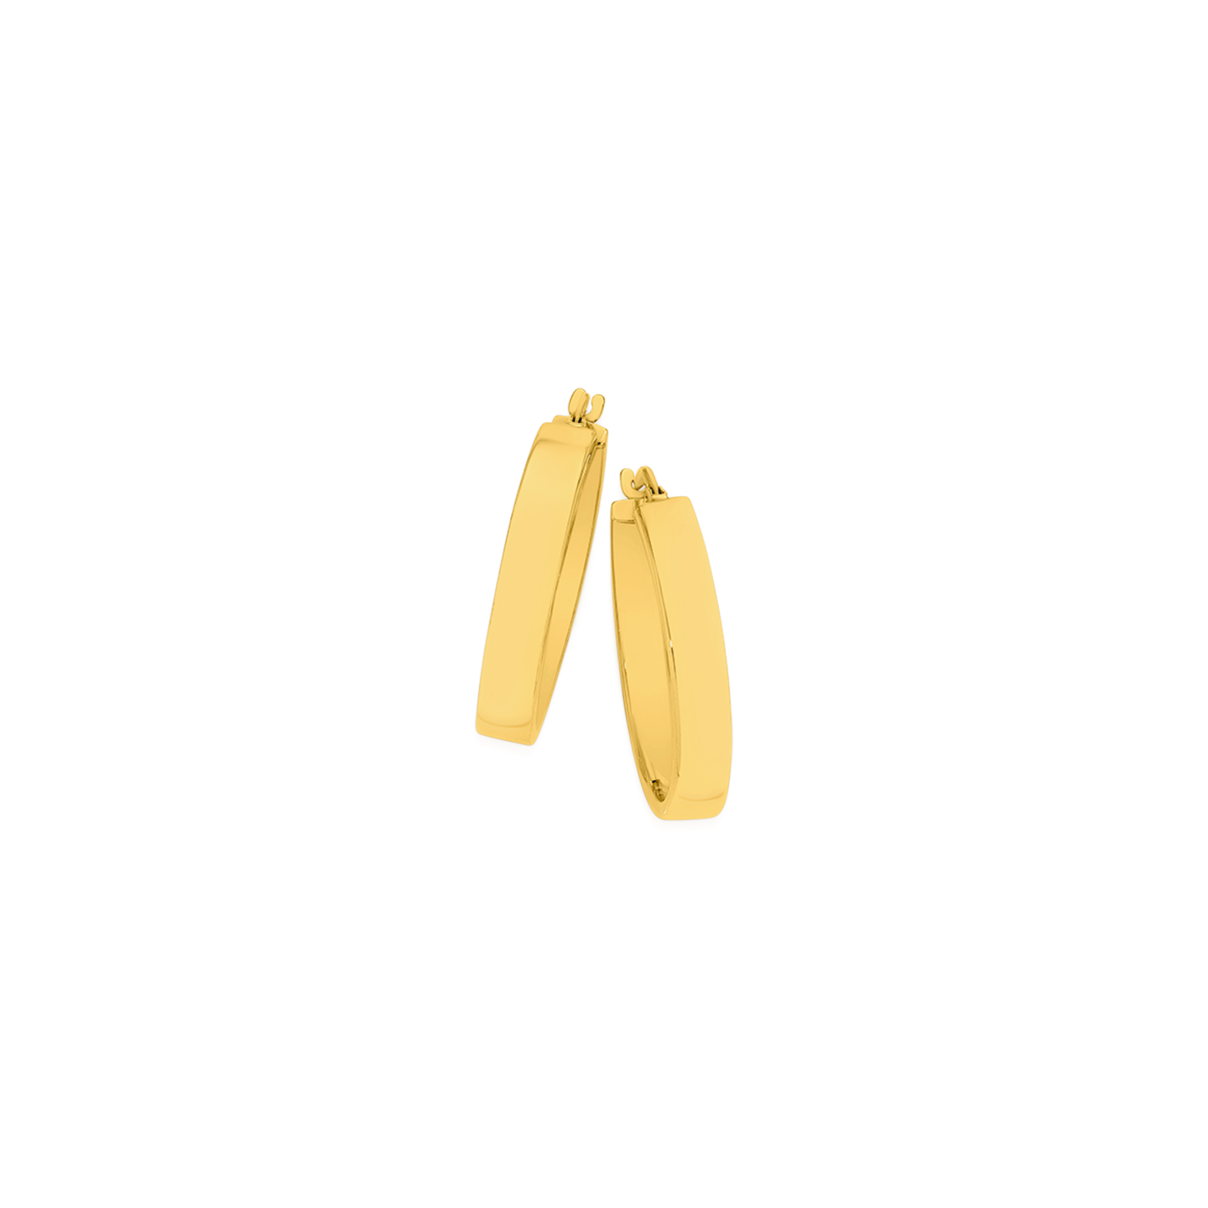 9ct Gold 4x20mm Polished Hoop Earrings | Earrings | Angus and Coote